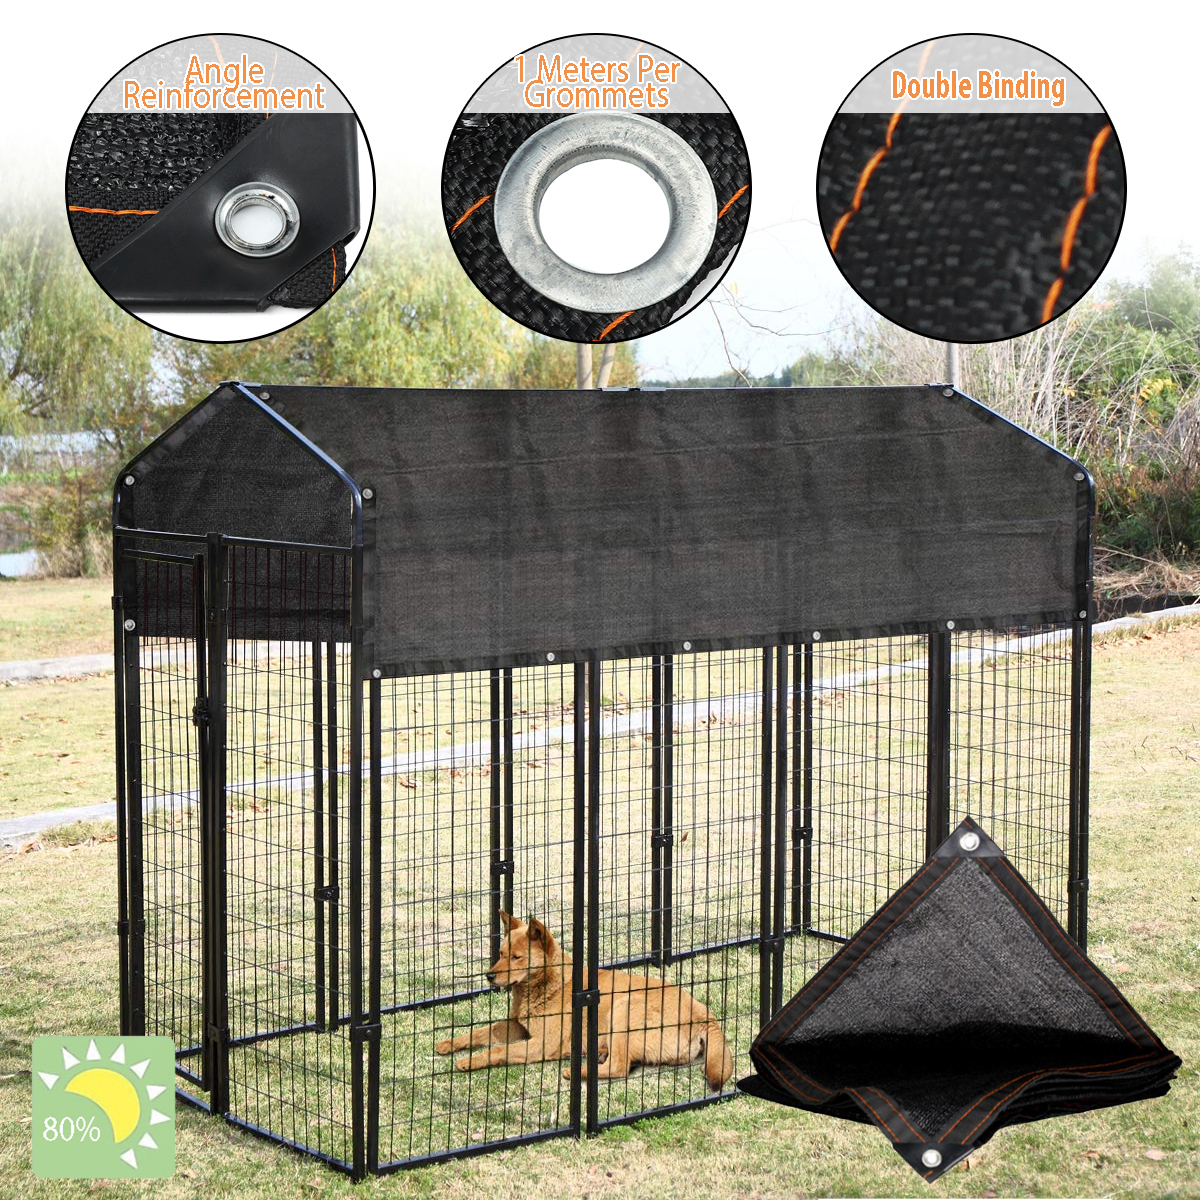 Sunshade-Net-Dog-Kennel-Puppy-Cat-Rabbit-Pet-Shade-Crate-Cover-Cage-Home-80-Sunblock-Shade-1614652-4